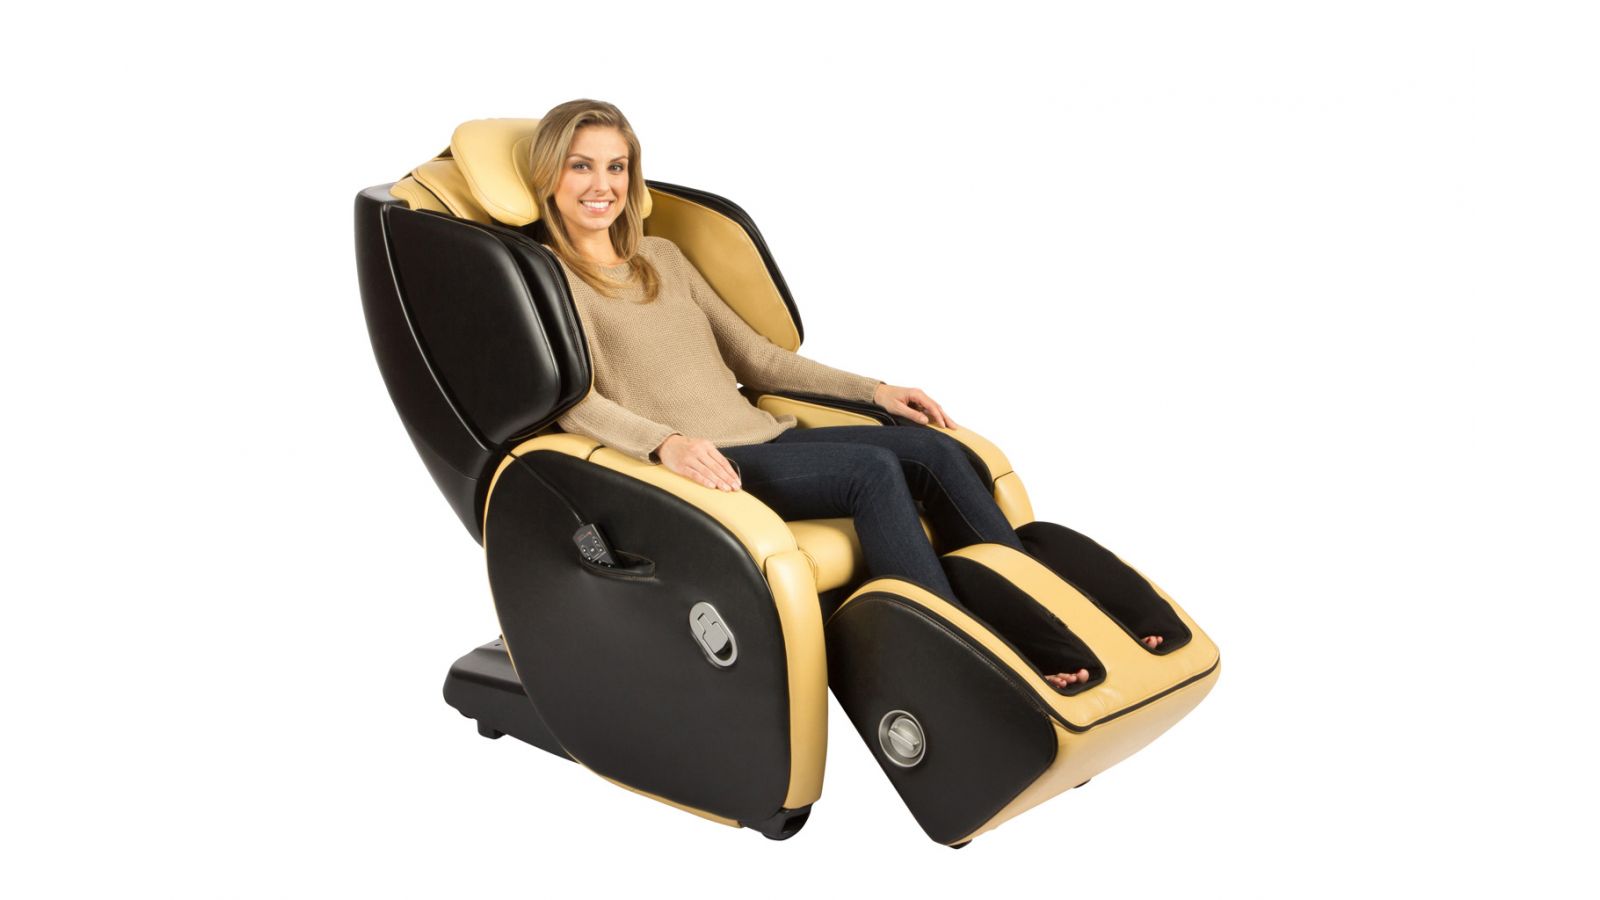 Human Touch AcuTouch 6.0 Massage Chair